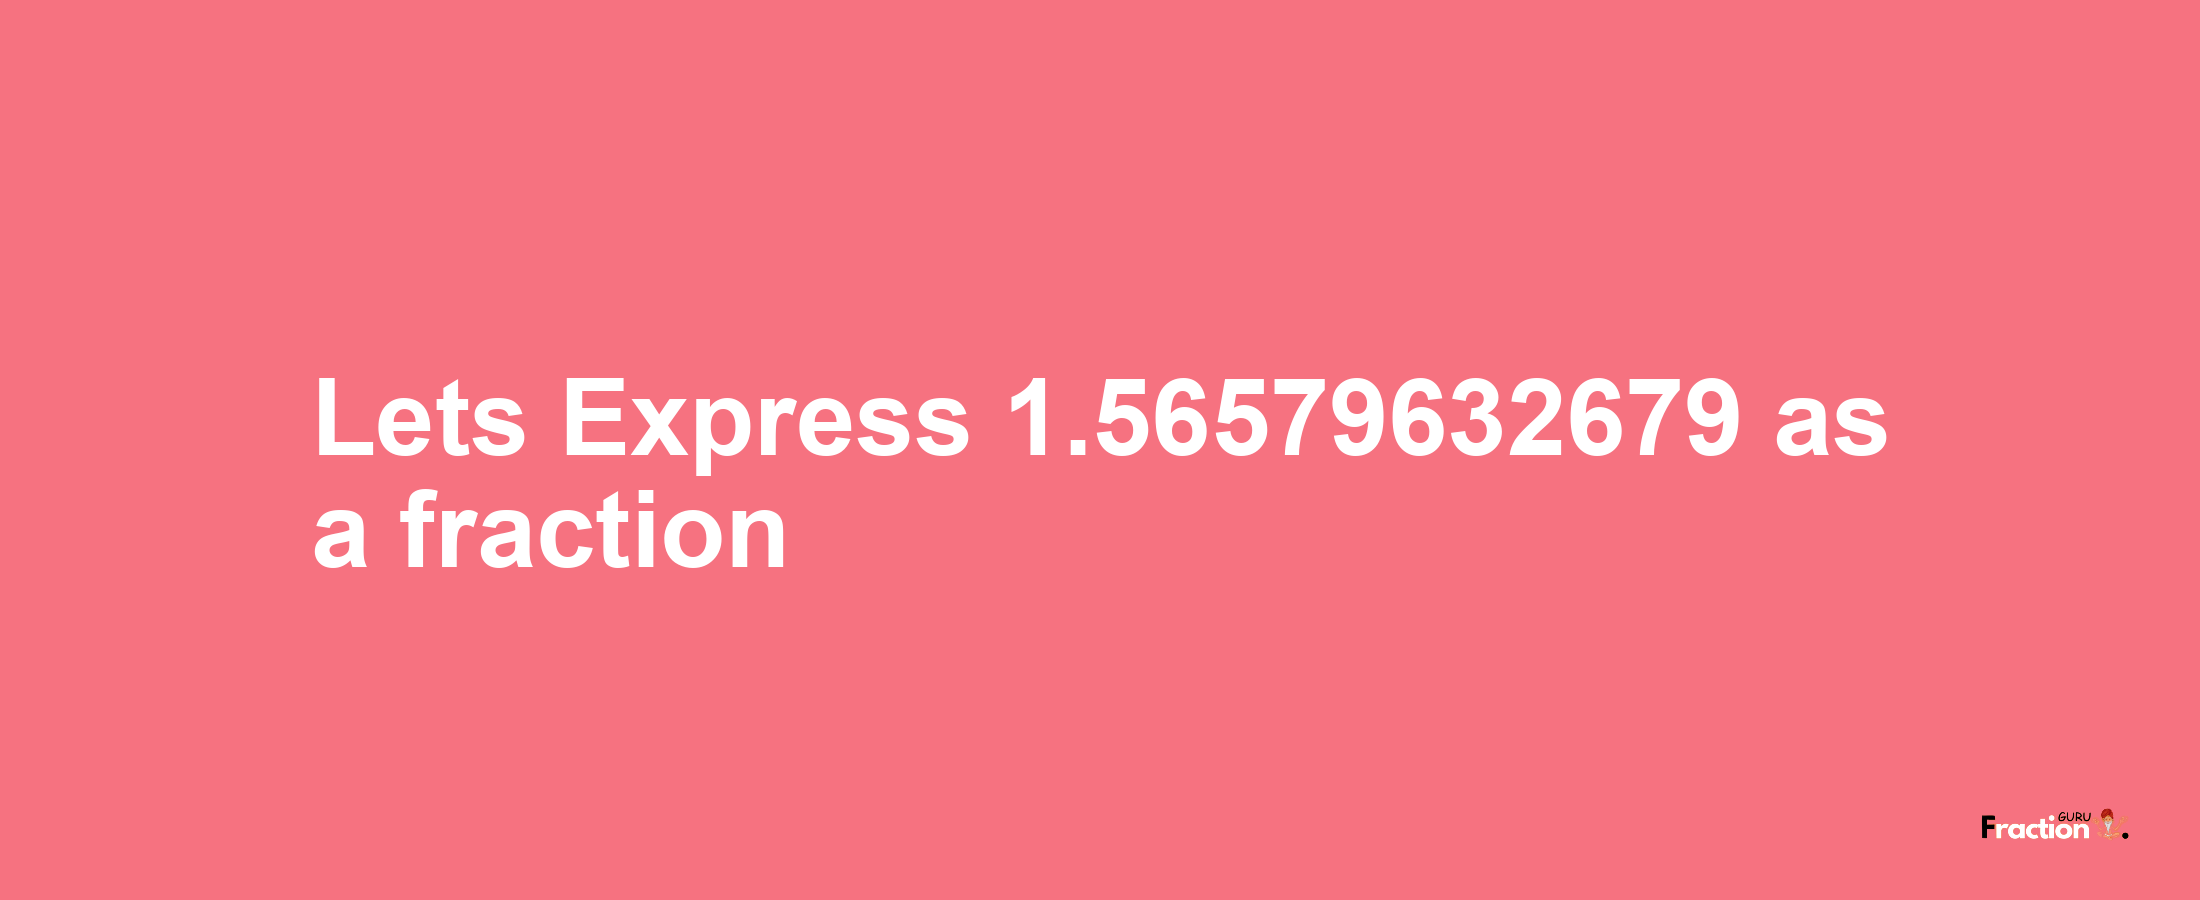 Lets Express 1.56579632679 as afraction